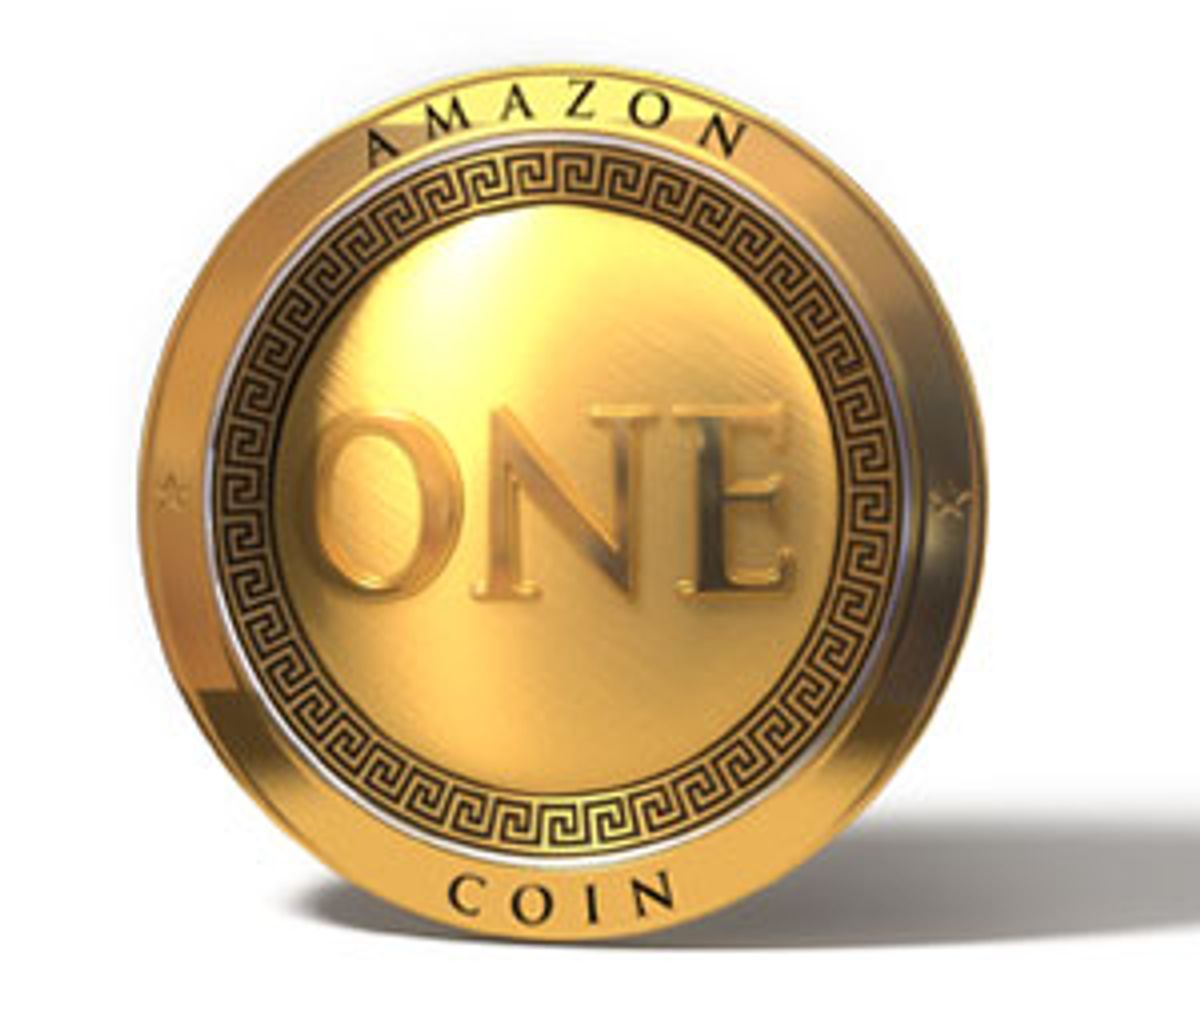 Amazon Coins: Jeff Bezos's 2013 Stimulus Bill For Kindle Fire App Developers